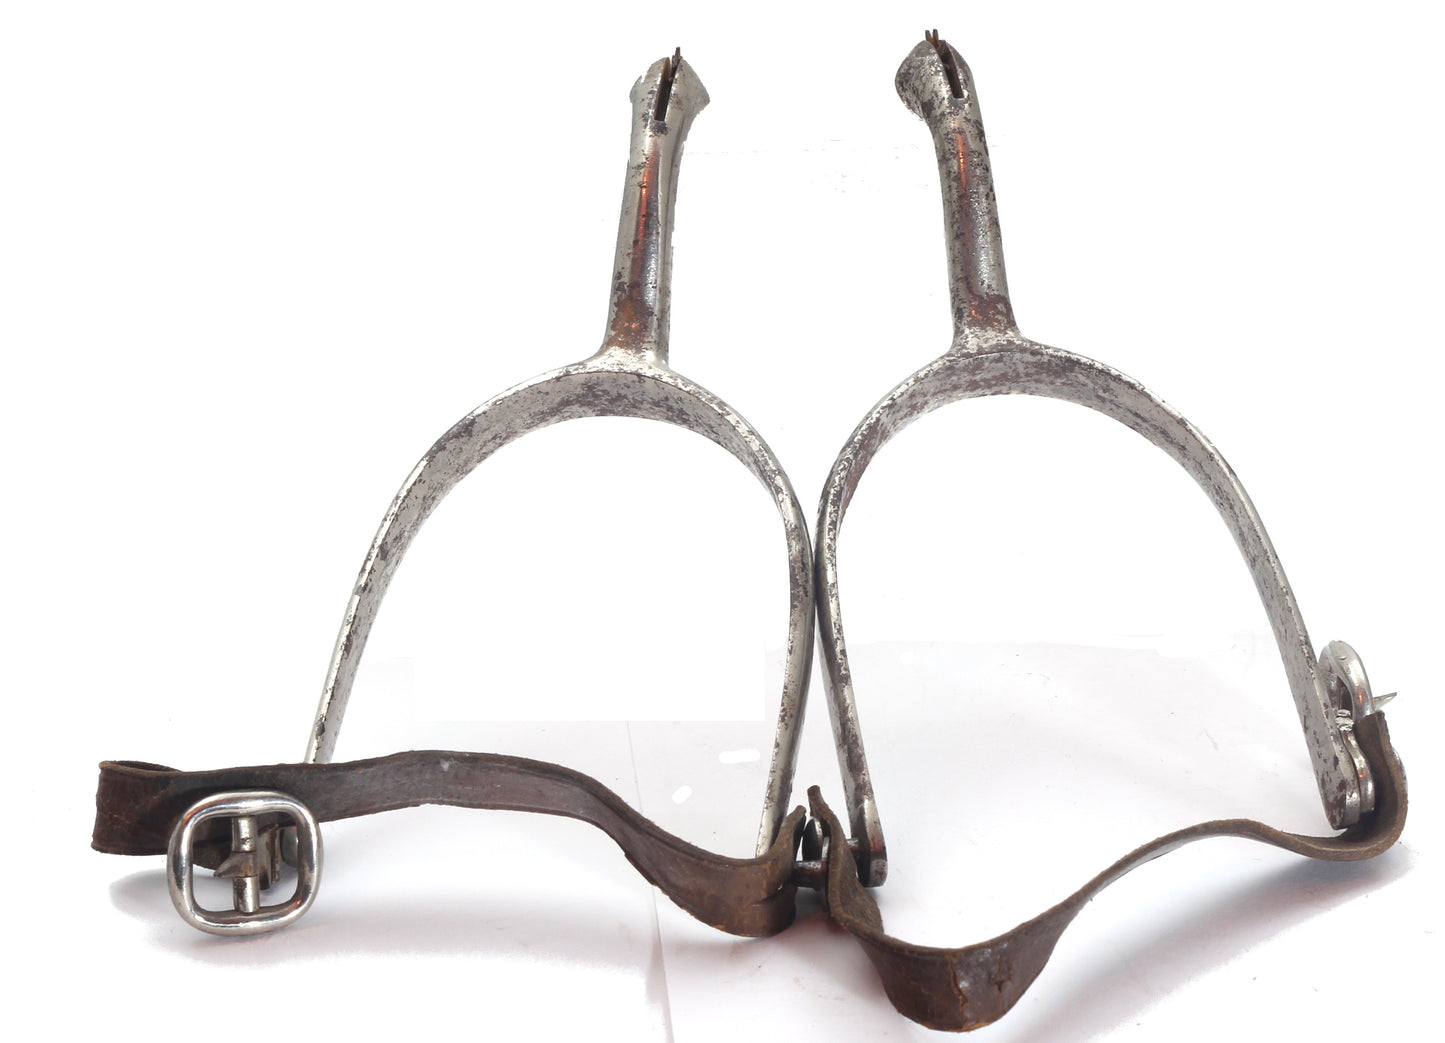 Pair of Heavy Swan Necked Spurs